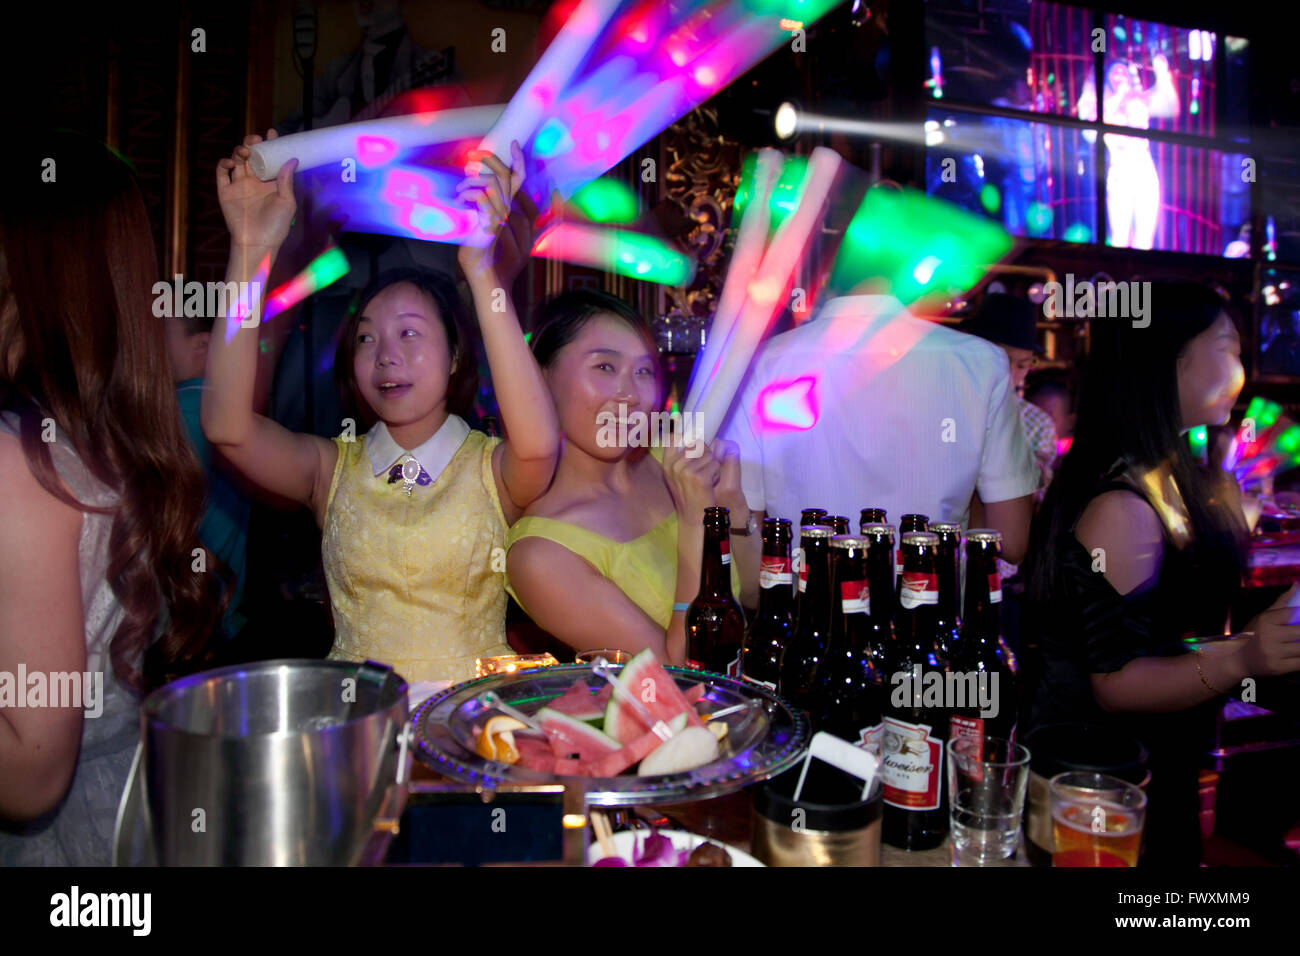 Clubbers at a club in China wave light-glow tubes and dance vigorously. Stock Photo